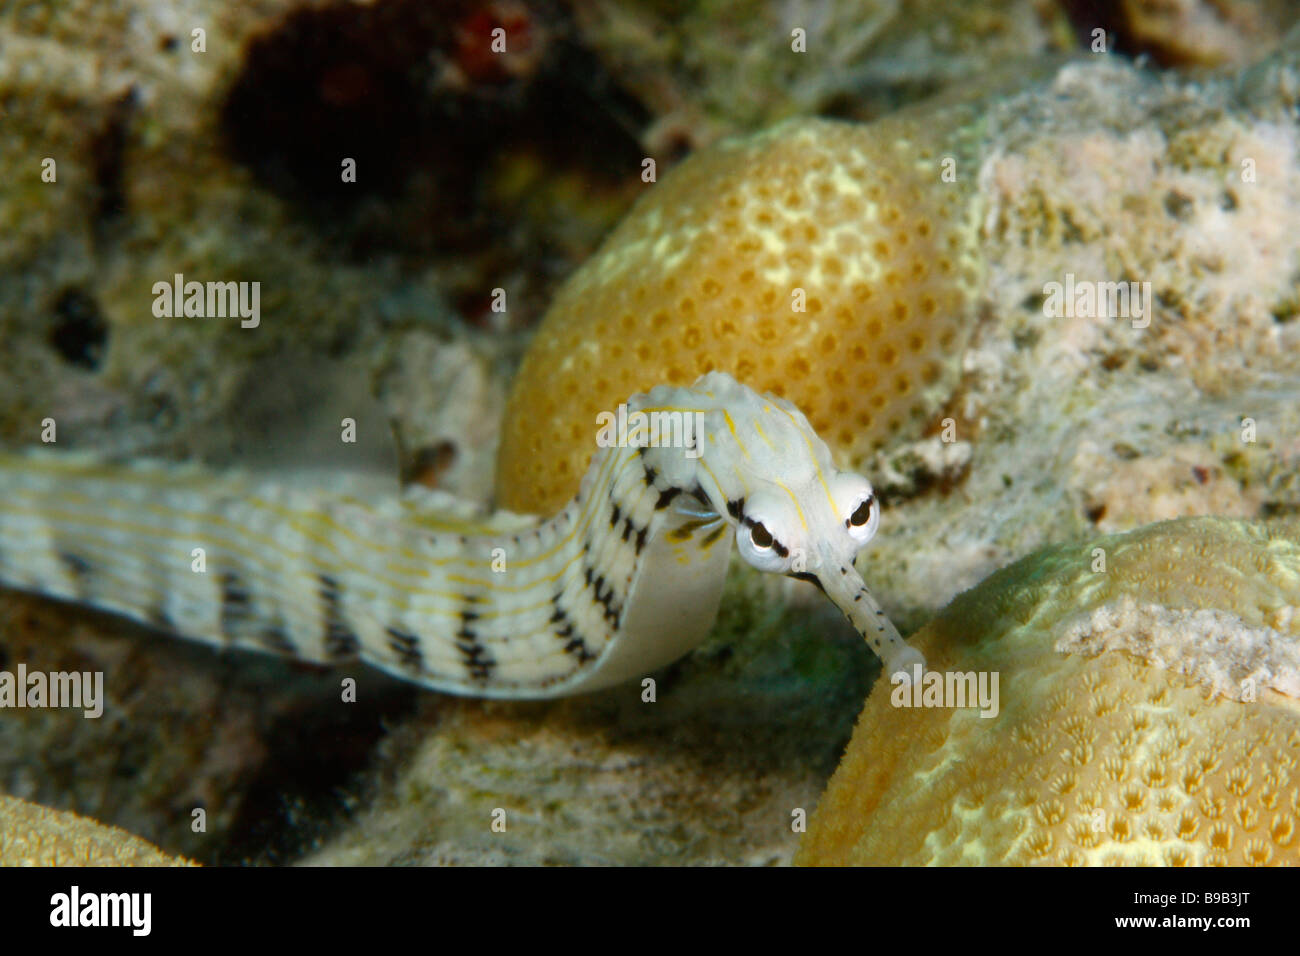 A frontal close-up head shot of a white banded pipefish with yellow coral head in the background Stock Photo